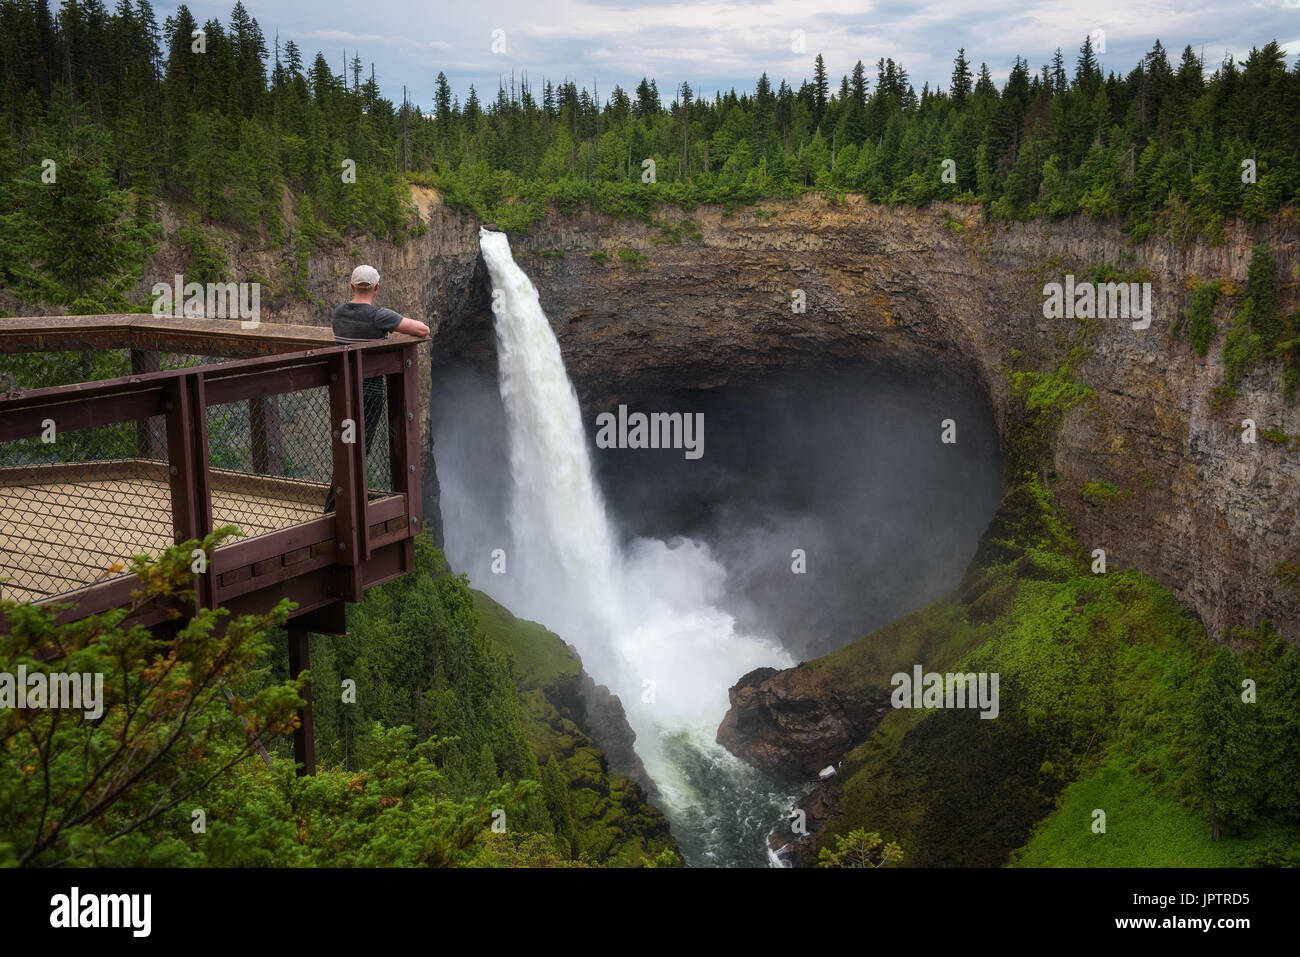 Tourist standing on an outlook platform and looking at the Helmcken Falls in Wells Gray Provincial Park near Clearwater, Canada. Stock Photo